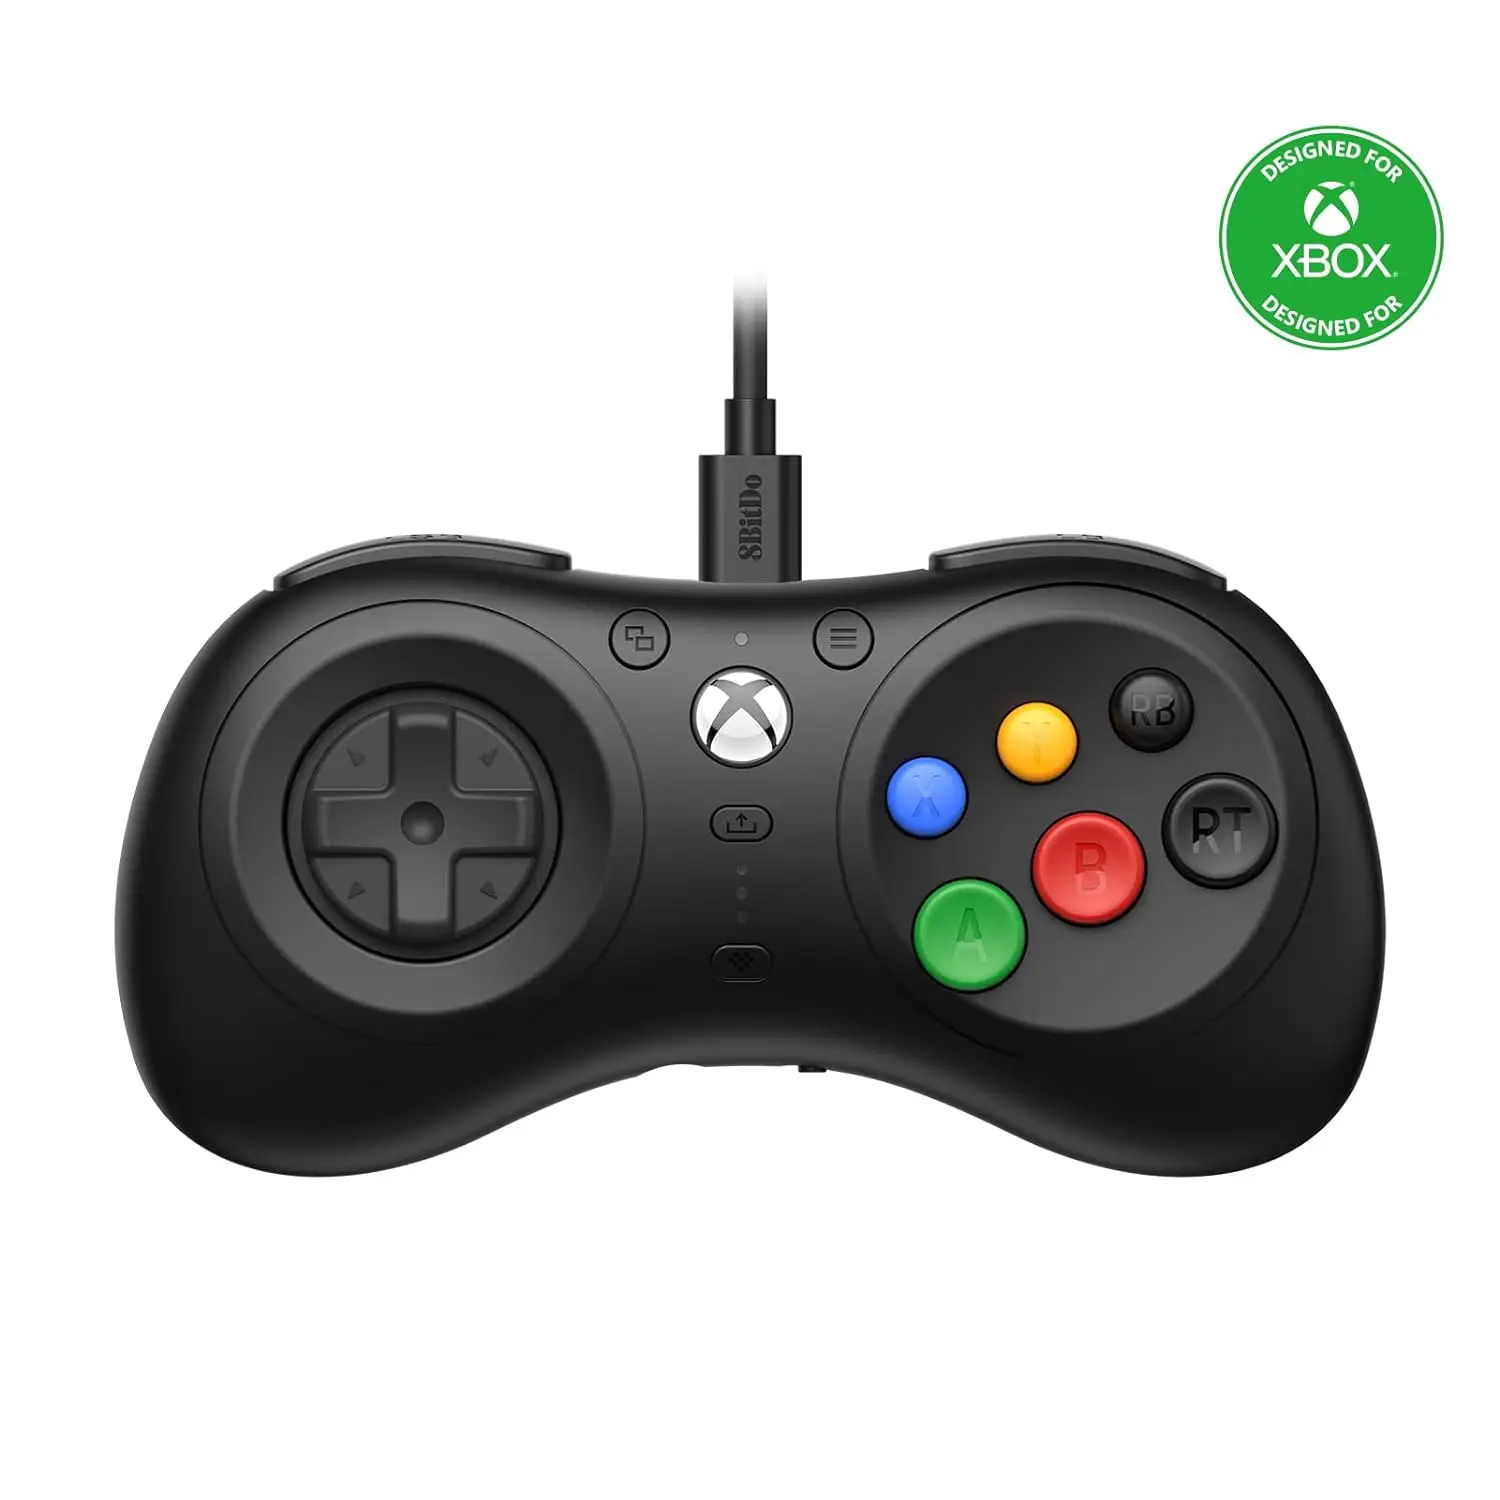 

M30 Gamepad Wired Controller for Xbox Series X|S, Xbox One, and Windows with 6-Button Layout - Officially Licensed